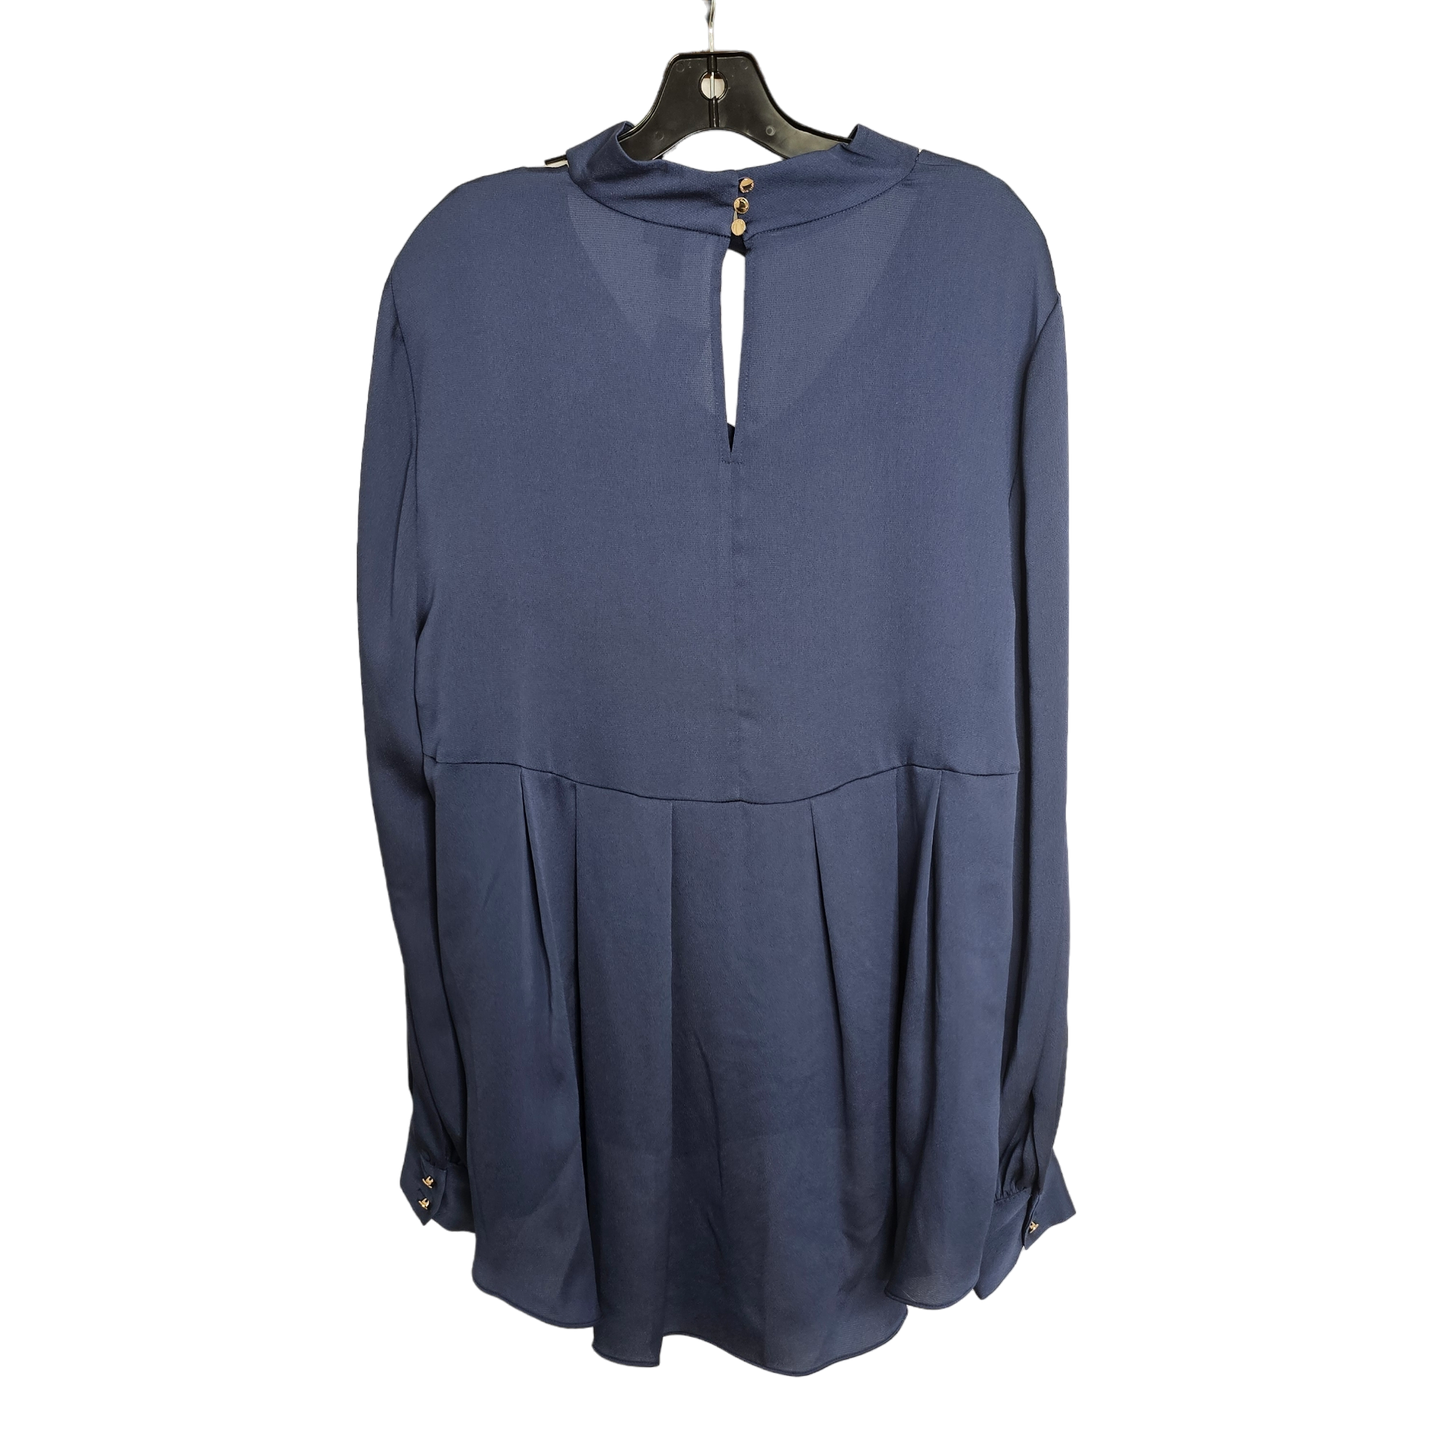 Blue Top Long Sleeve Vince Camuto, Size Xl